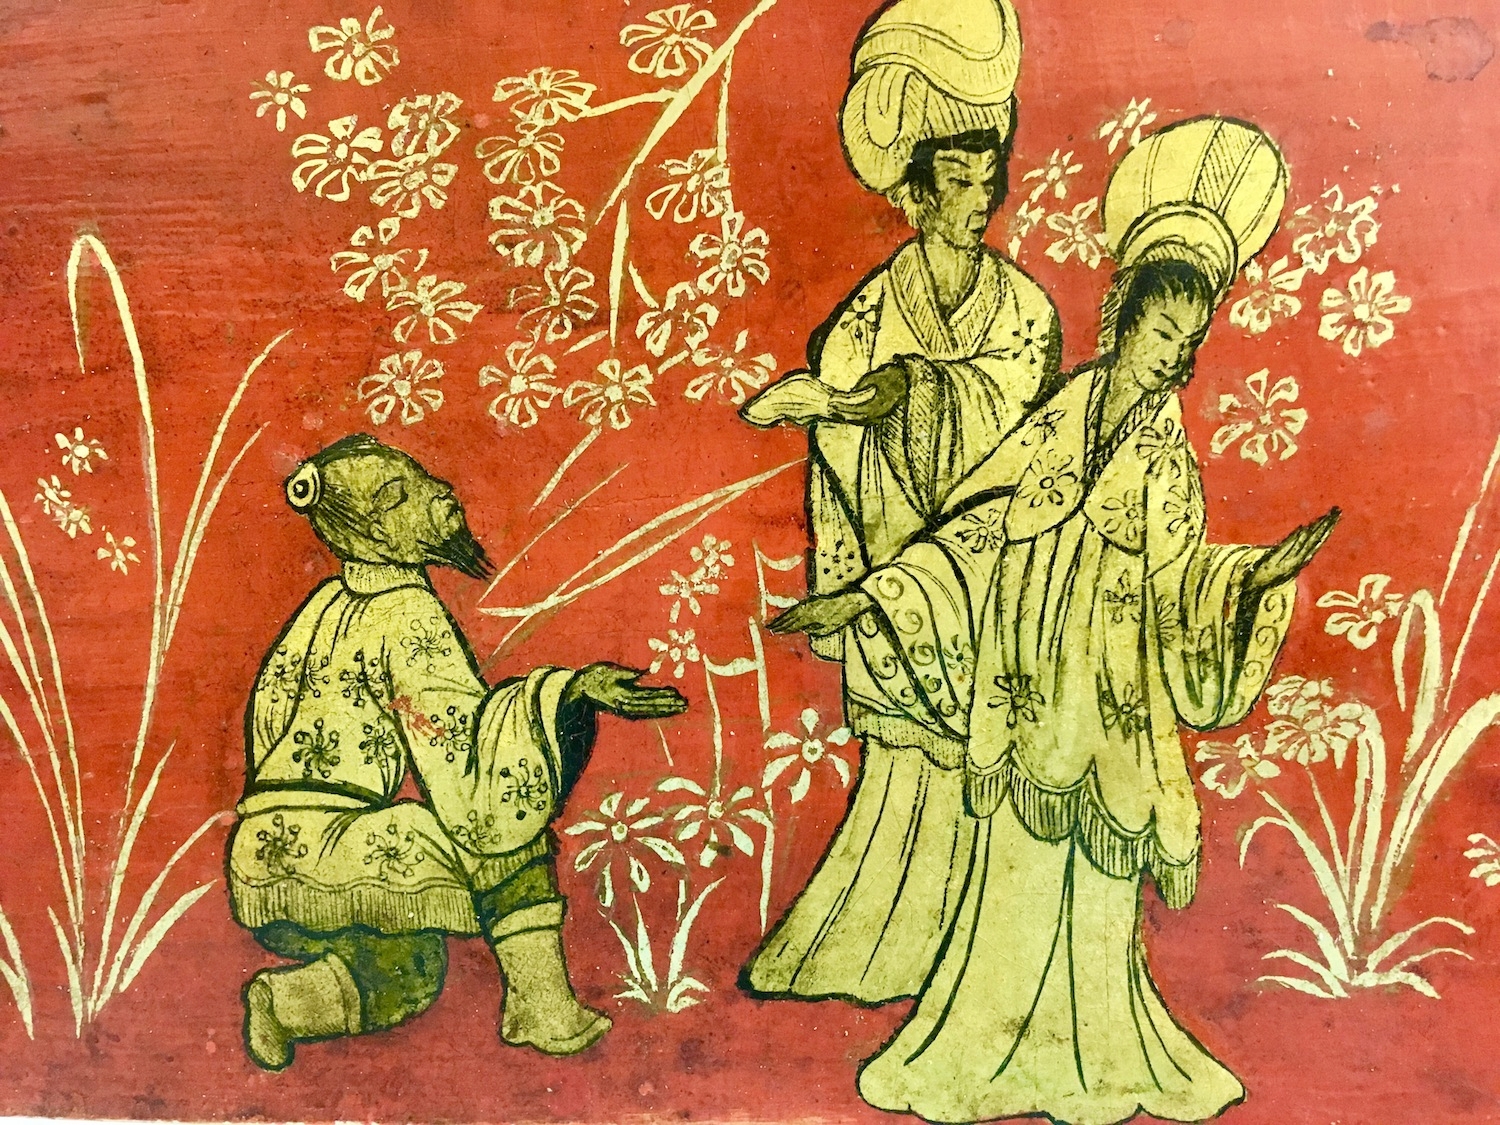   For this Chinoiserie scene the figures were first modeled using a technique known as pastiglia, where rabbit glue gesso is layered to make a raised form of the subjects.&nbsp; The red background I made with blonde shellac and genuine cinnabar over 